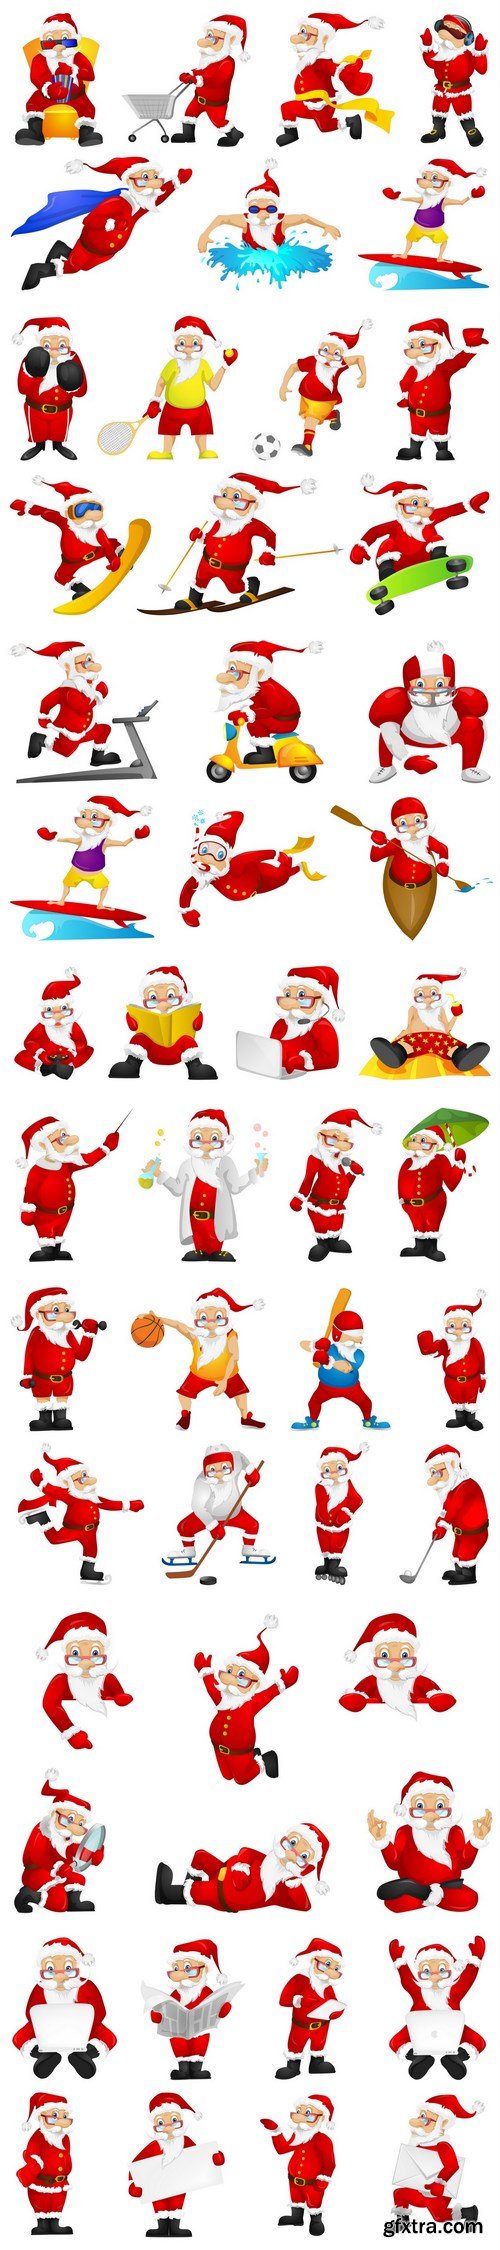 Life and style Santa Claus - 7xEPS